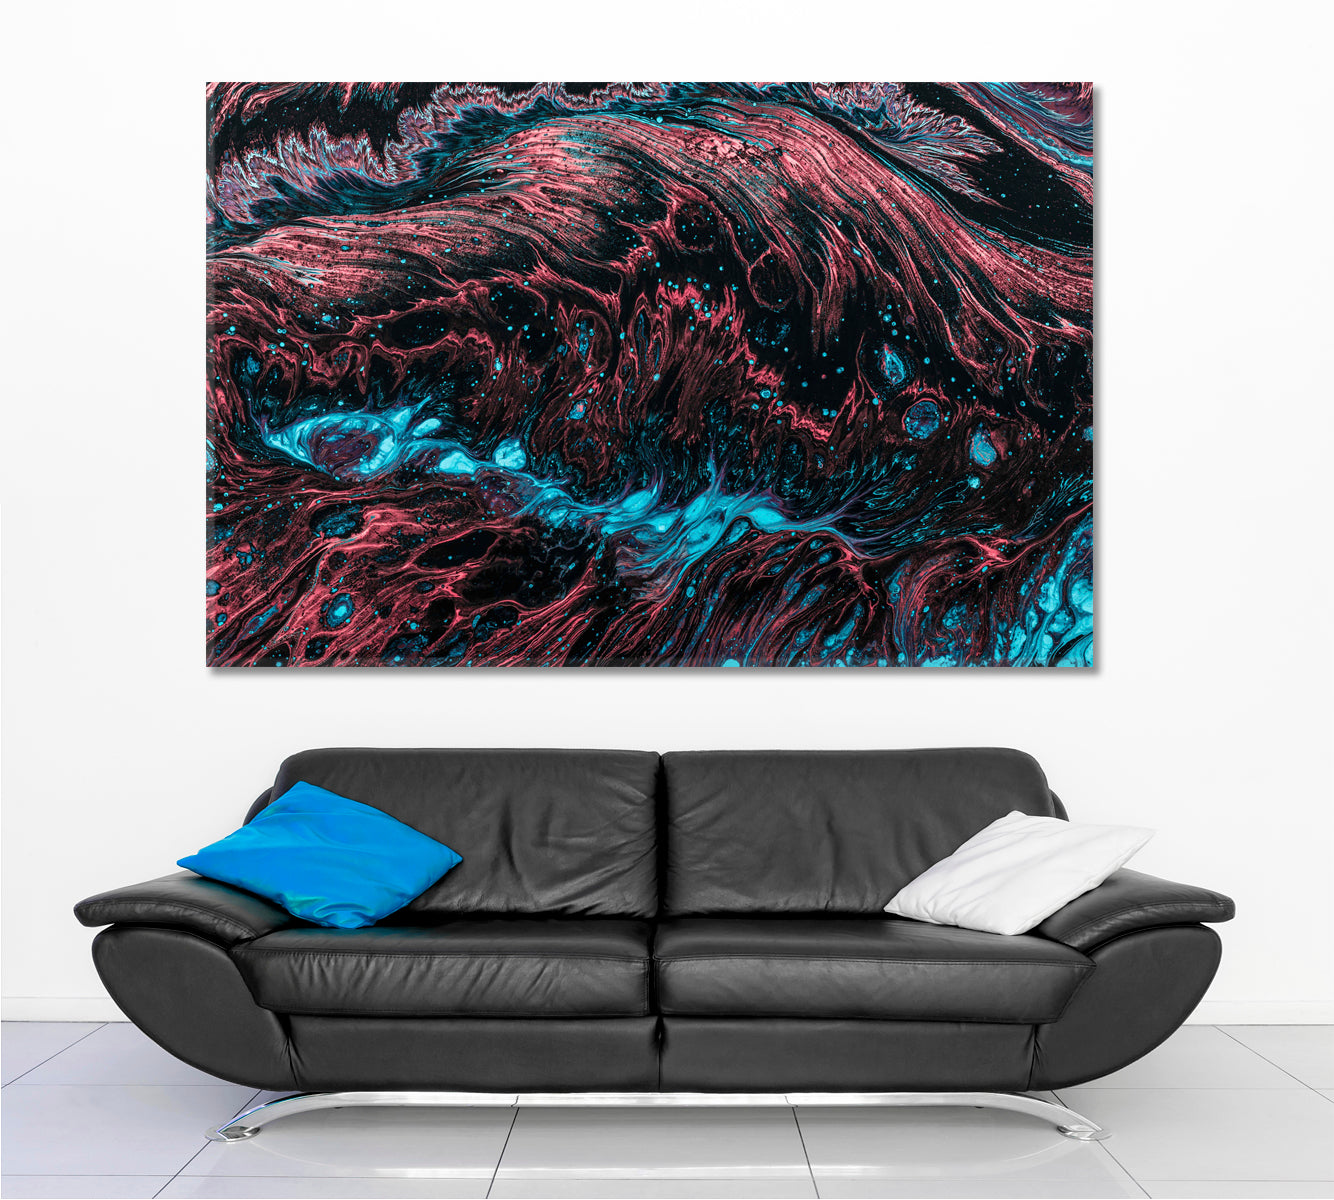 FRACTAL Turquoise Coral Black Abstract Creative Pattern Abstract Art Print Artesty 1 panel 24" x 16" 